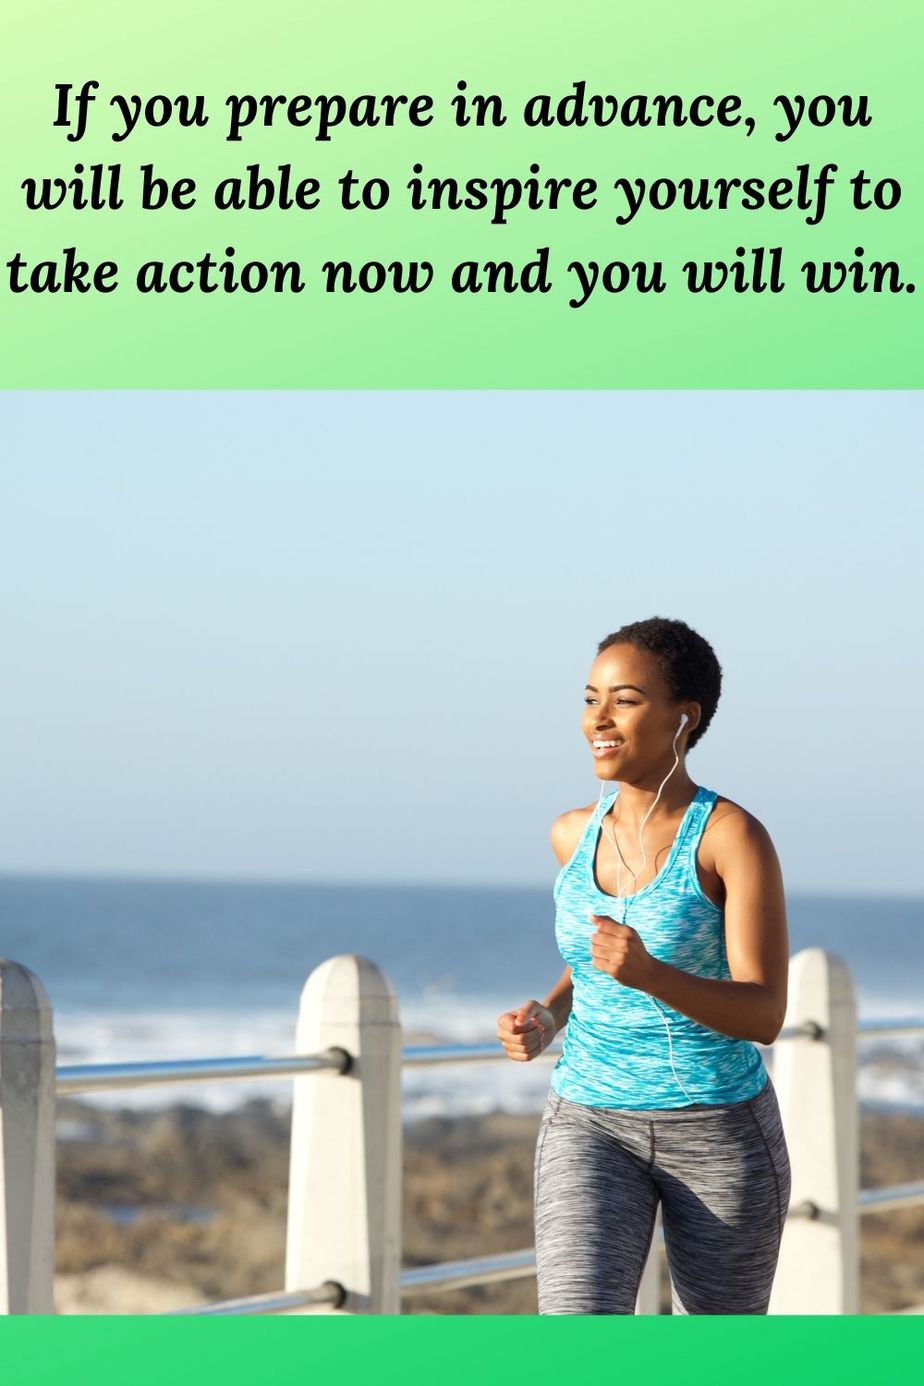 african american woman jogging and a text box with the words "If you prepare in advance, you will be able to inspire yourself to take action now and you will win."